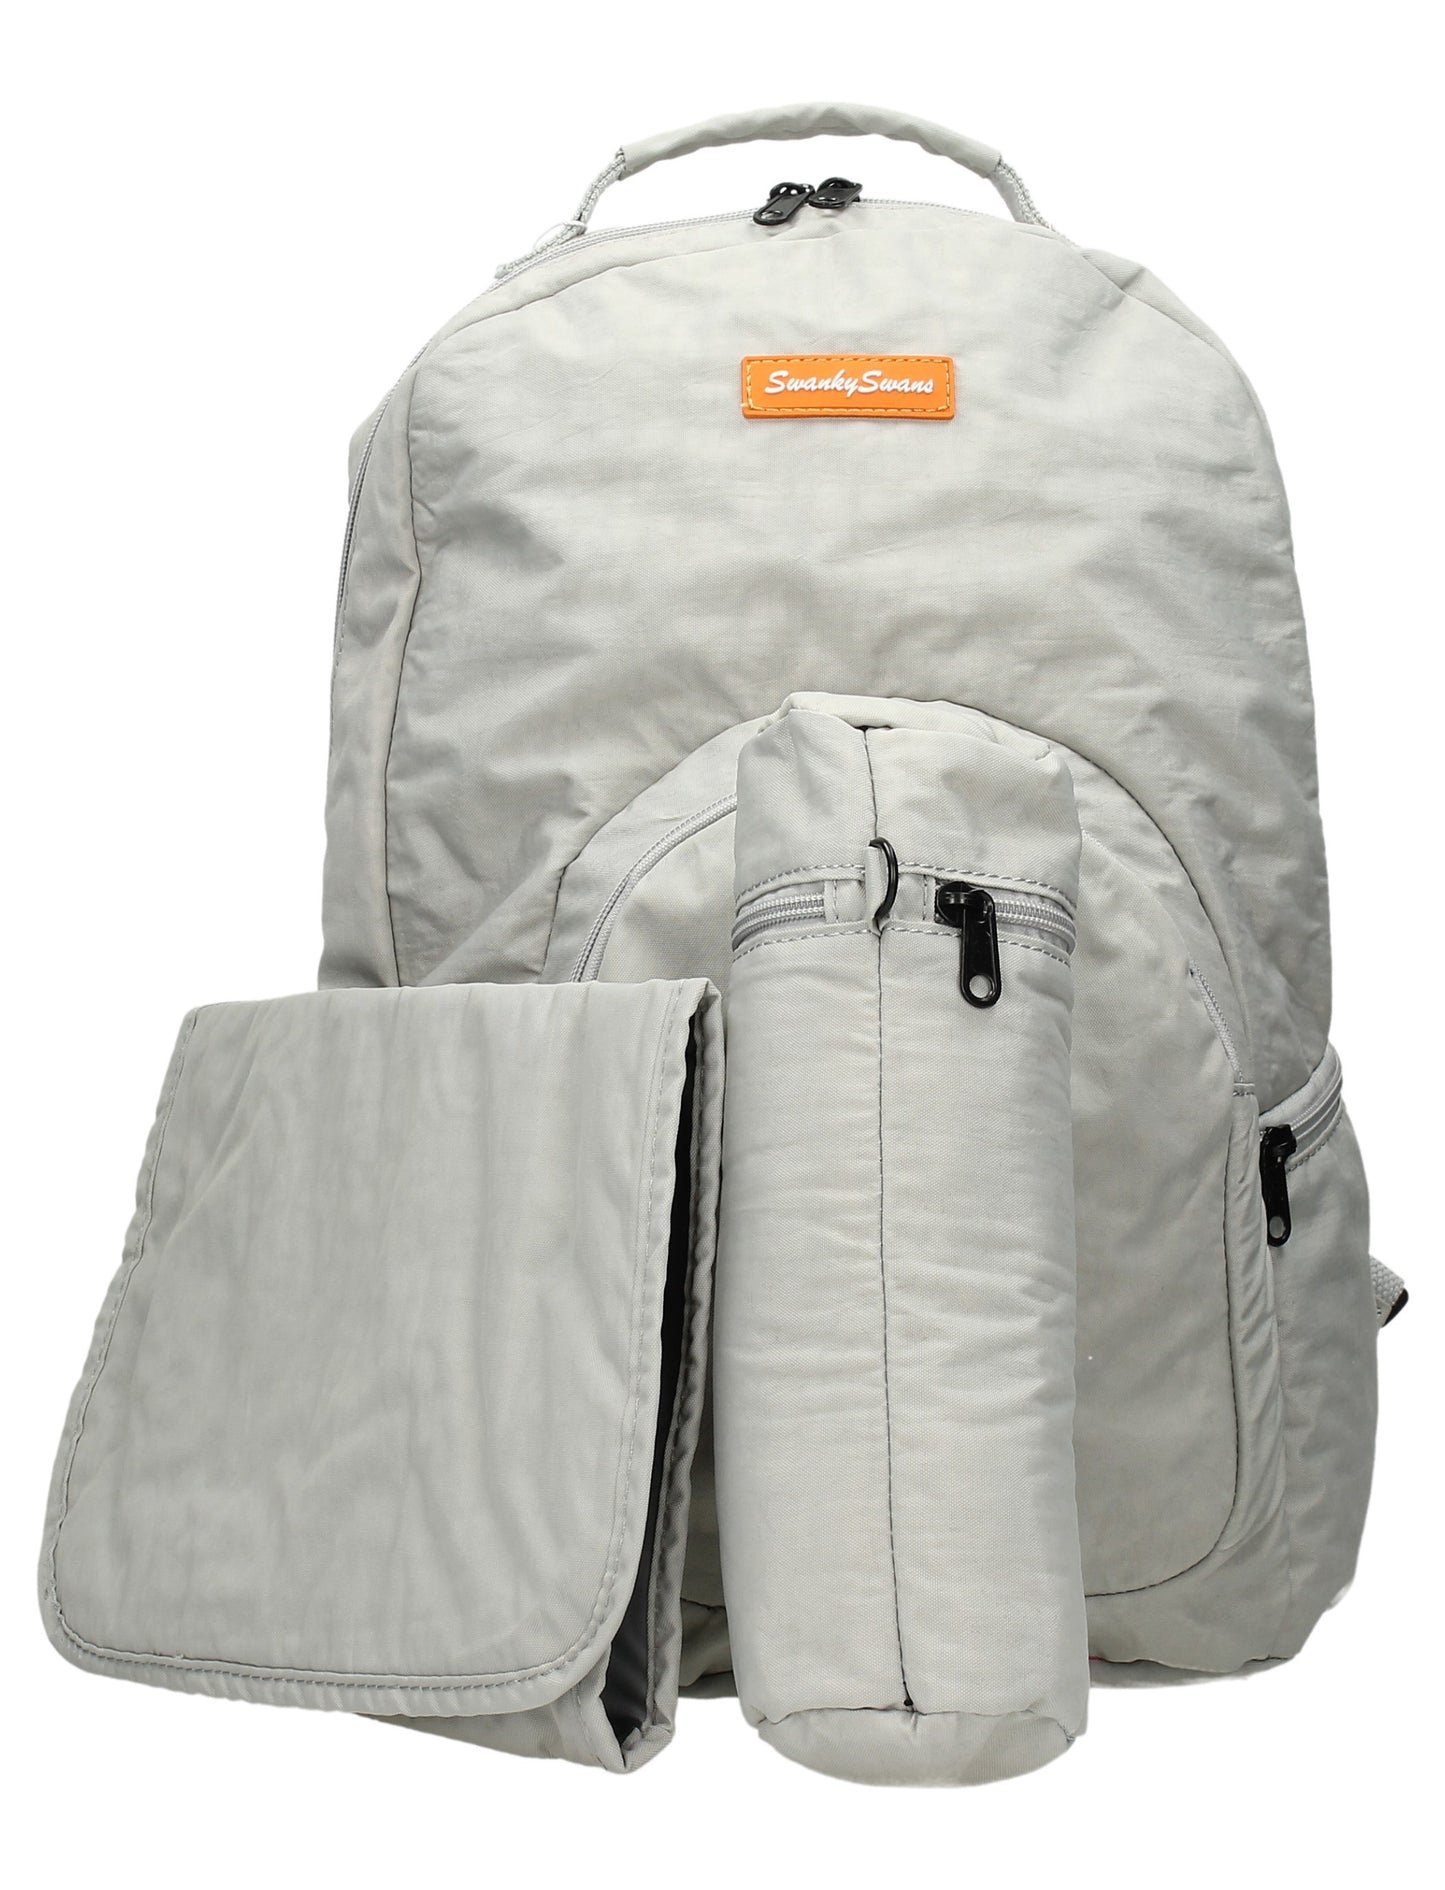 Joseph & Mary Baby Changing Backpack - Pale Grey-Baby Changing-SWANKYSWANS